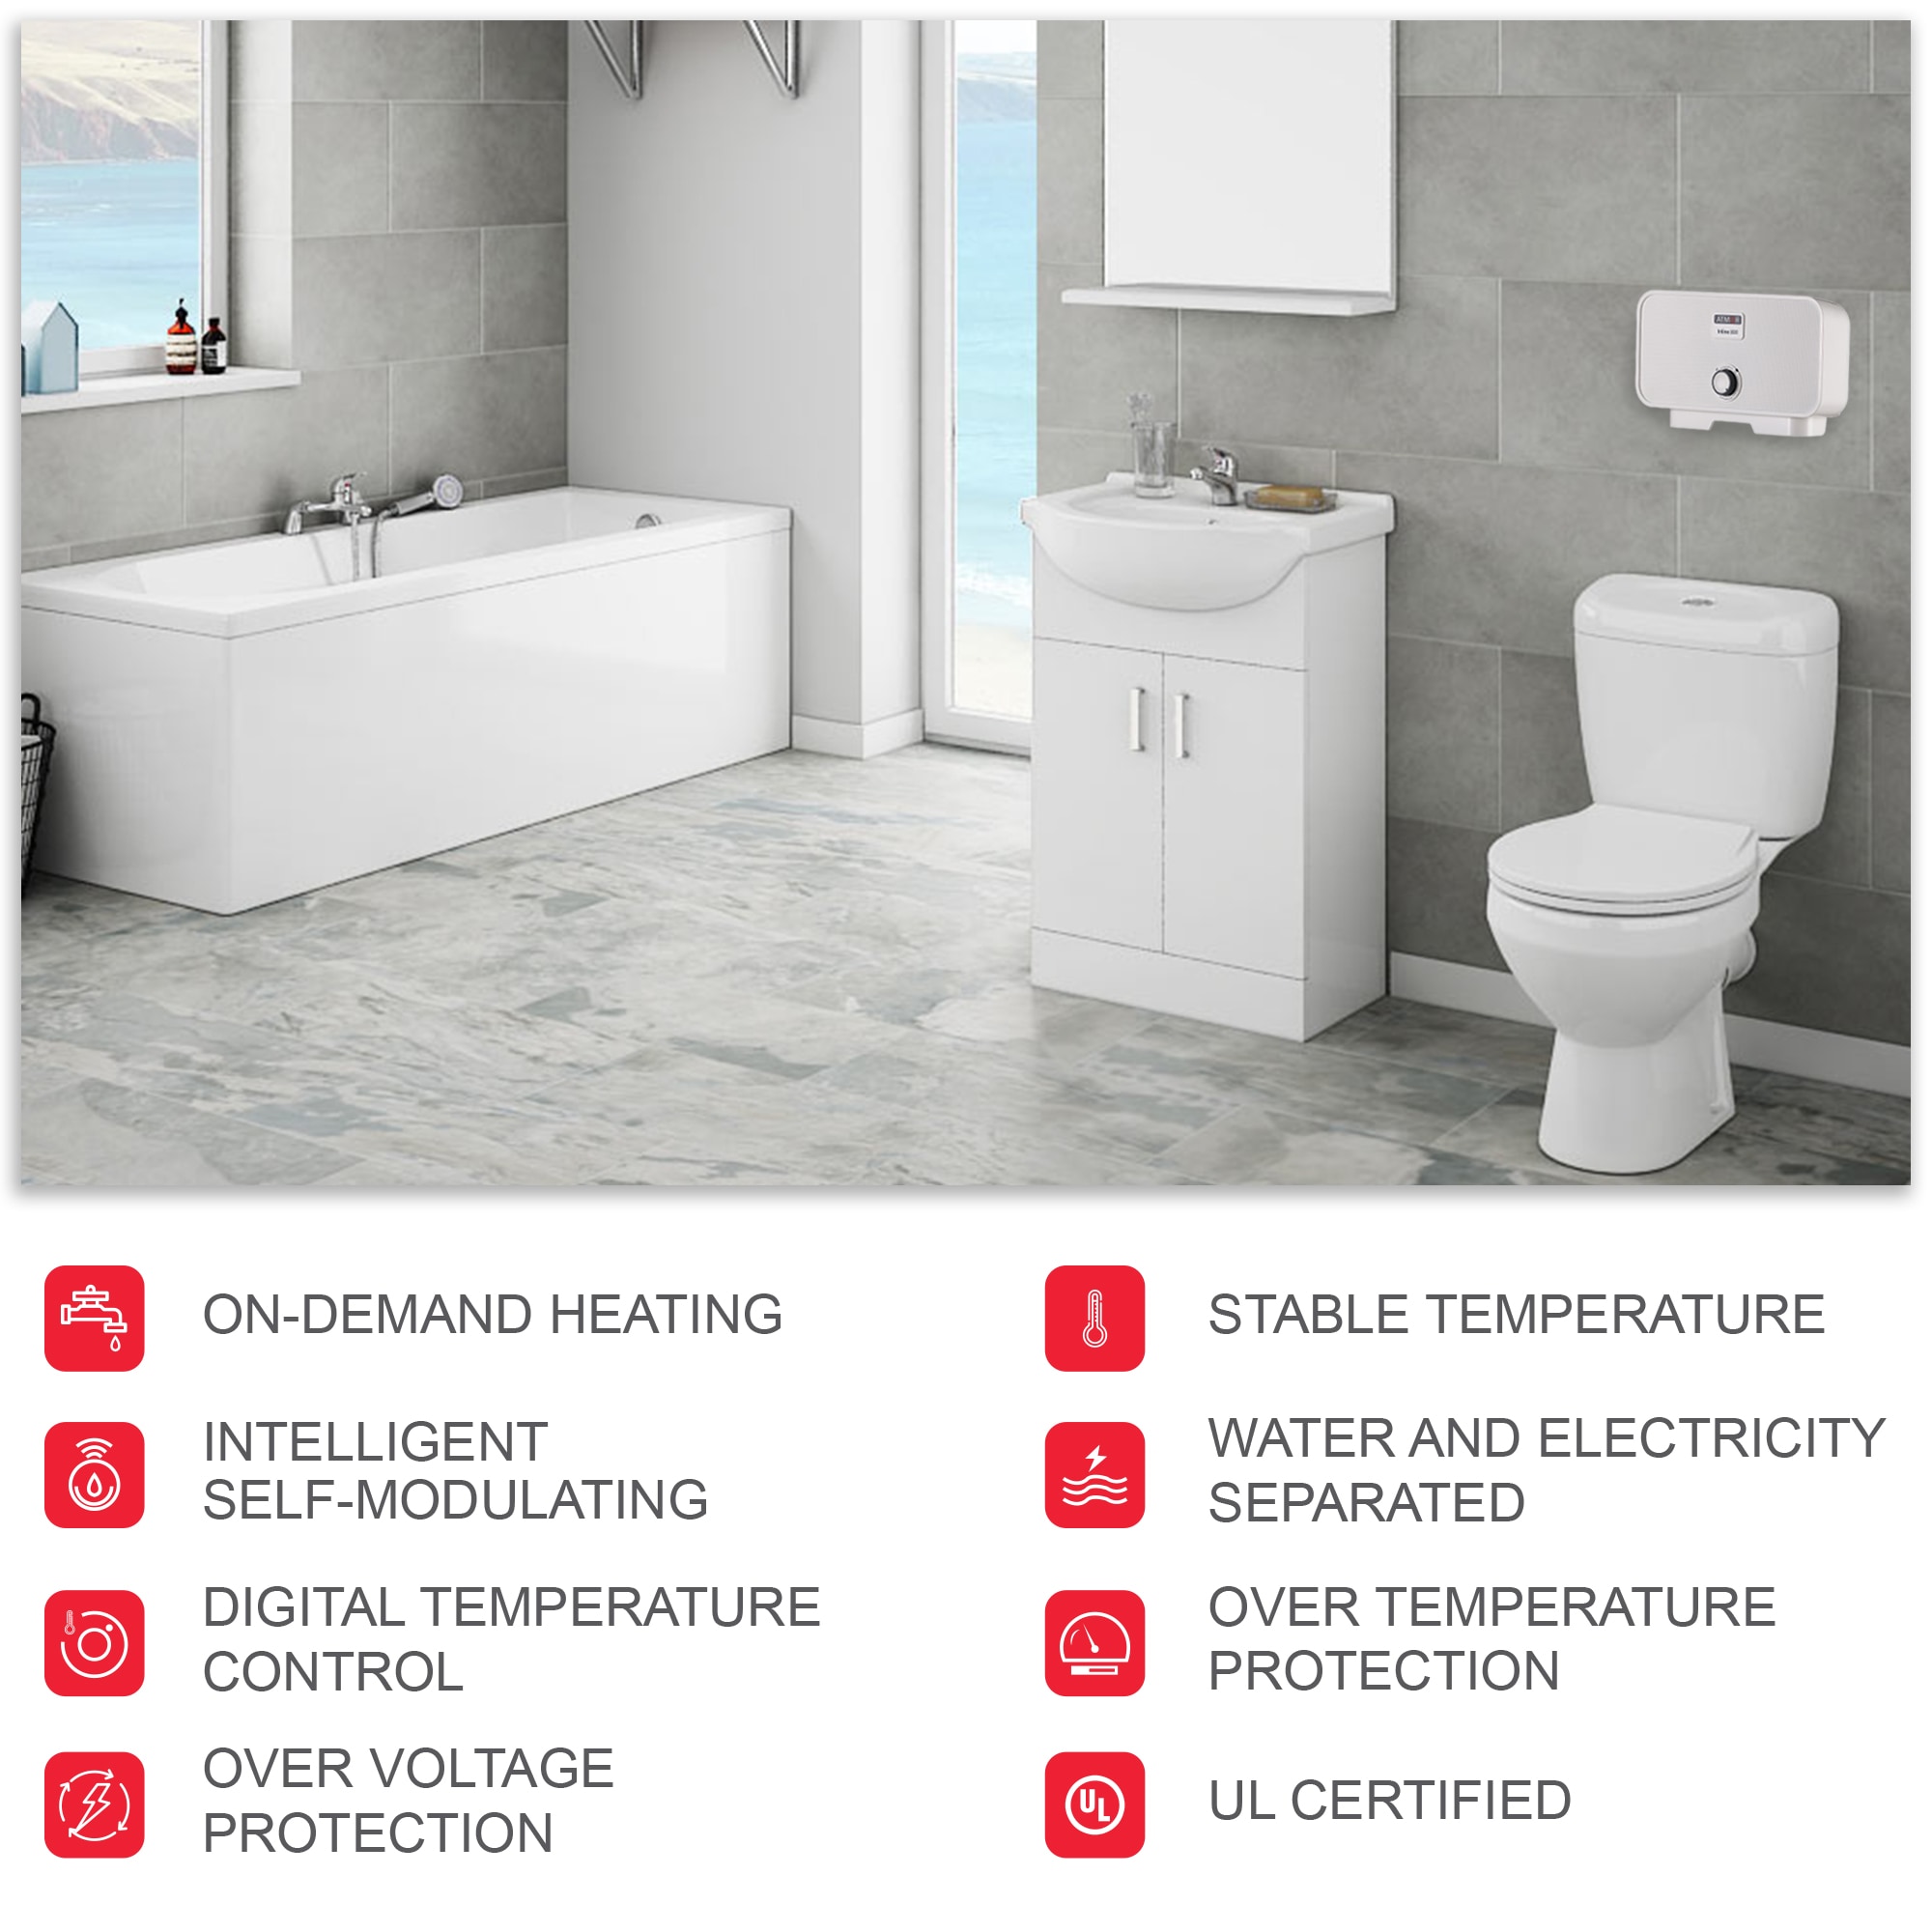 Instant Hot Water Heater Electric Tankless On Demand House Shower Sink  6000W USA